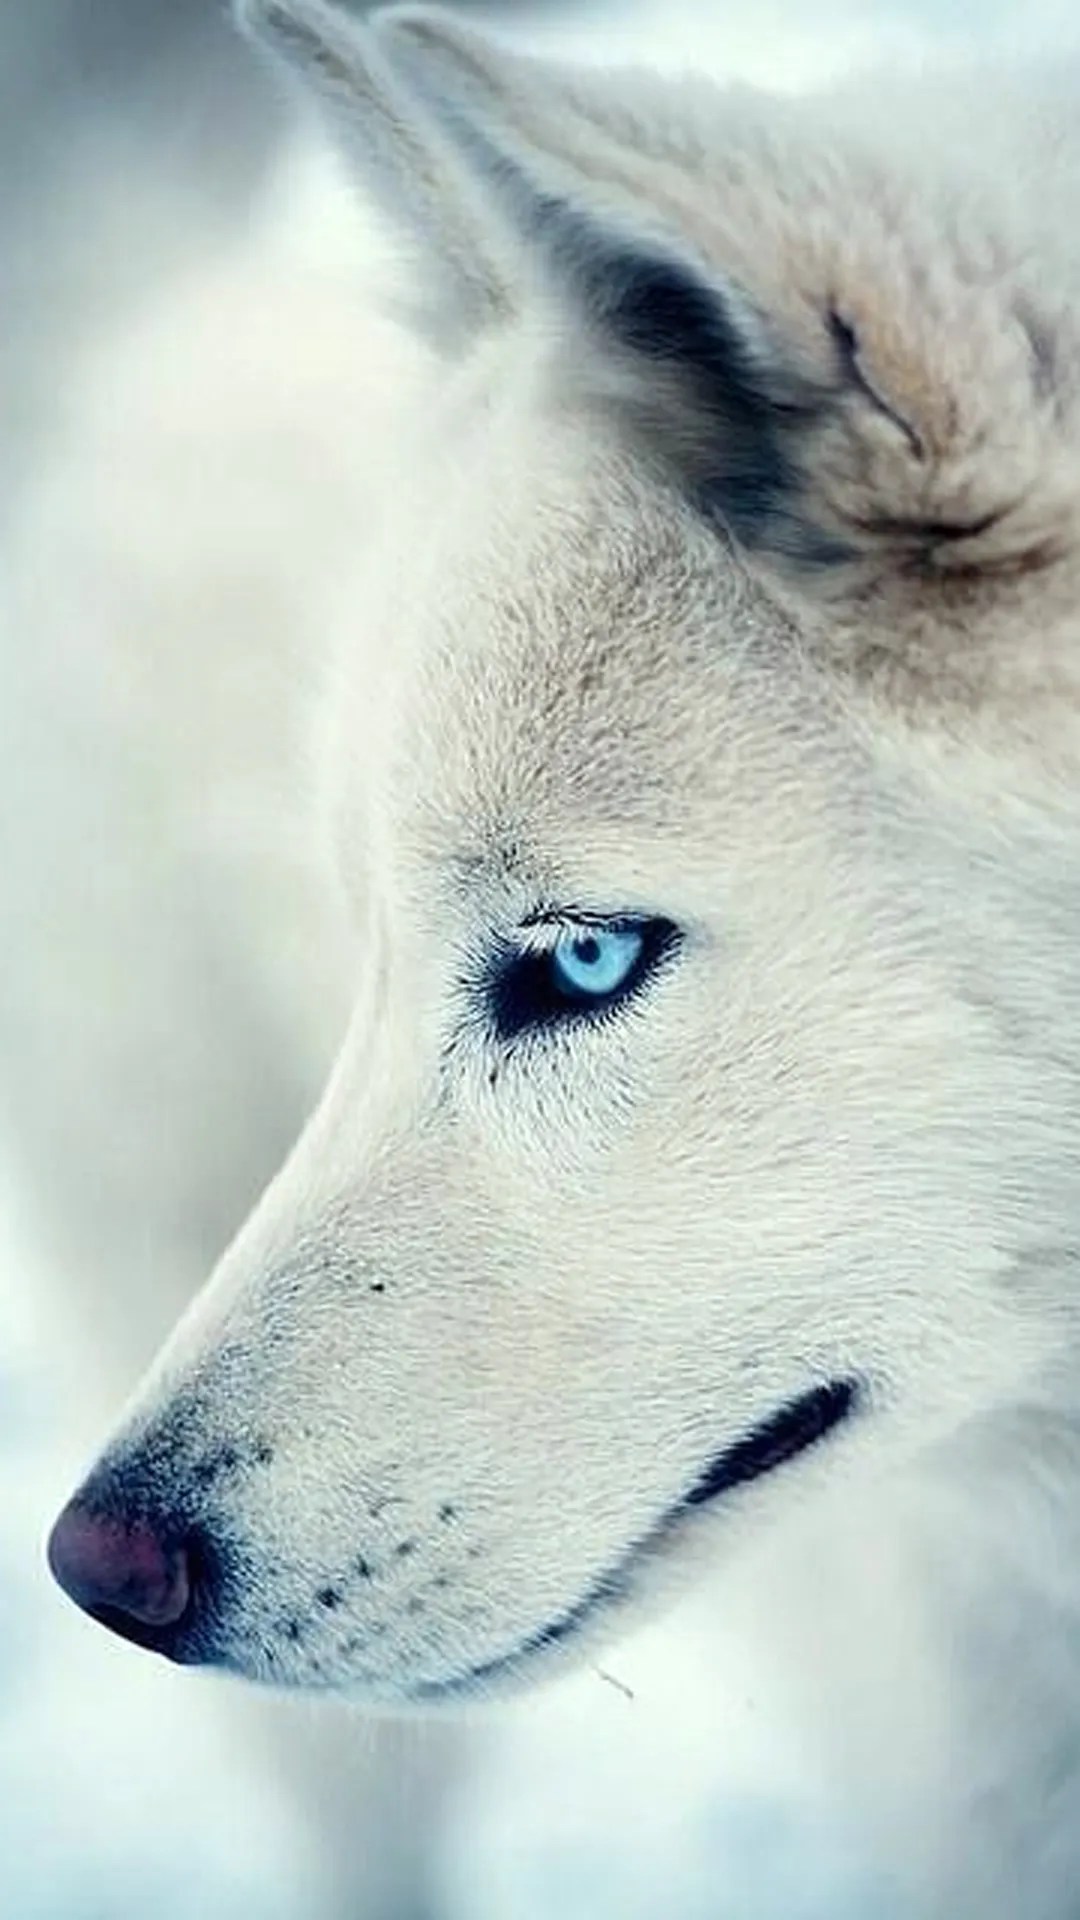 IPhone wallpaper of a white wolf with blue eyes. - Wolf